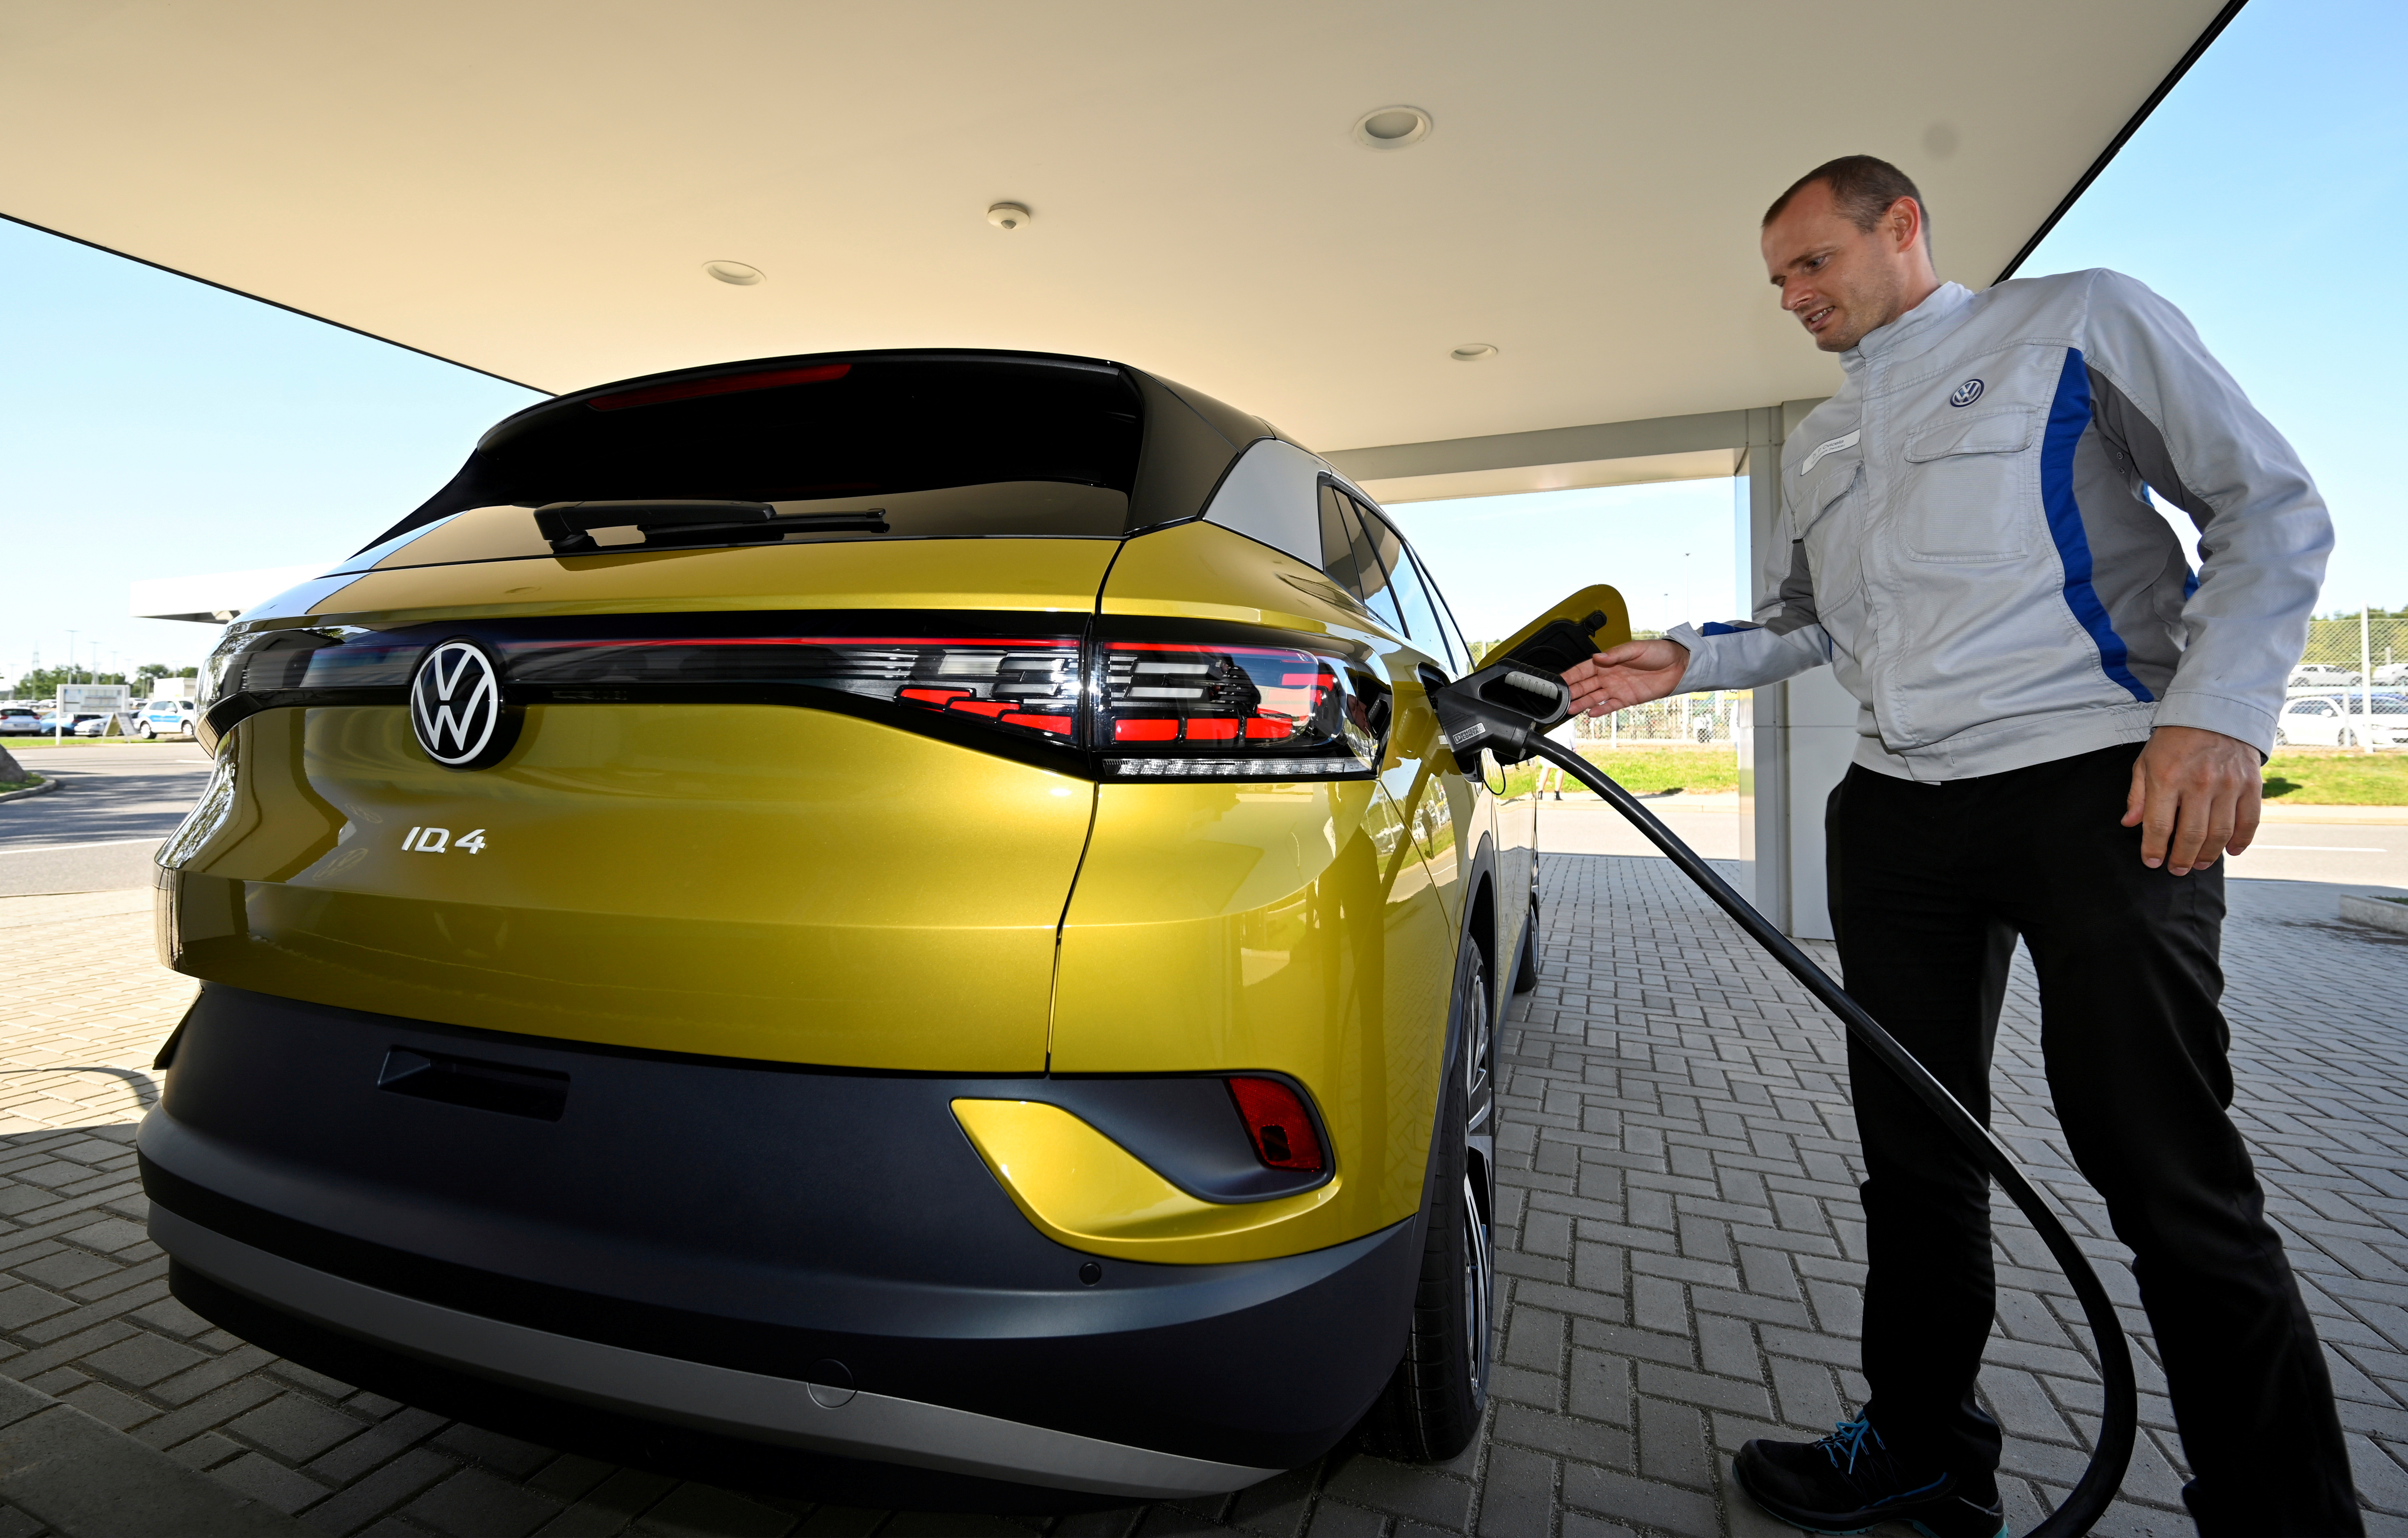 An employee presents the new electric Volkswagen model ID.4 during a media show in Zwickau, Germany, September 18, 2020. REUTERS/Matthias Rietschel/File Photo